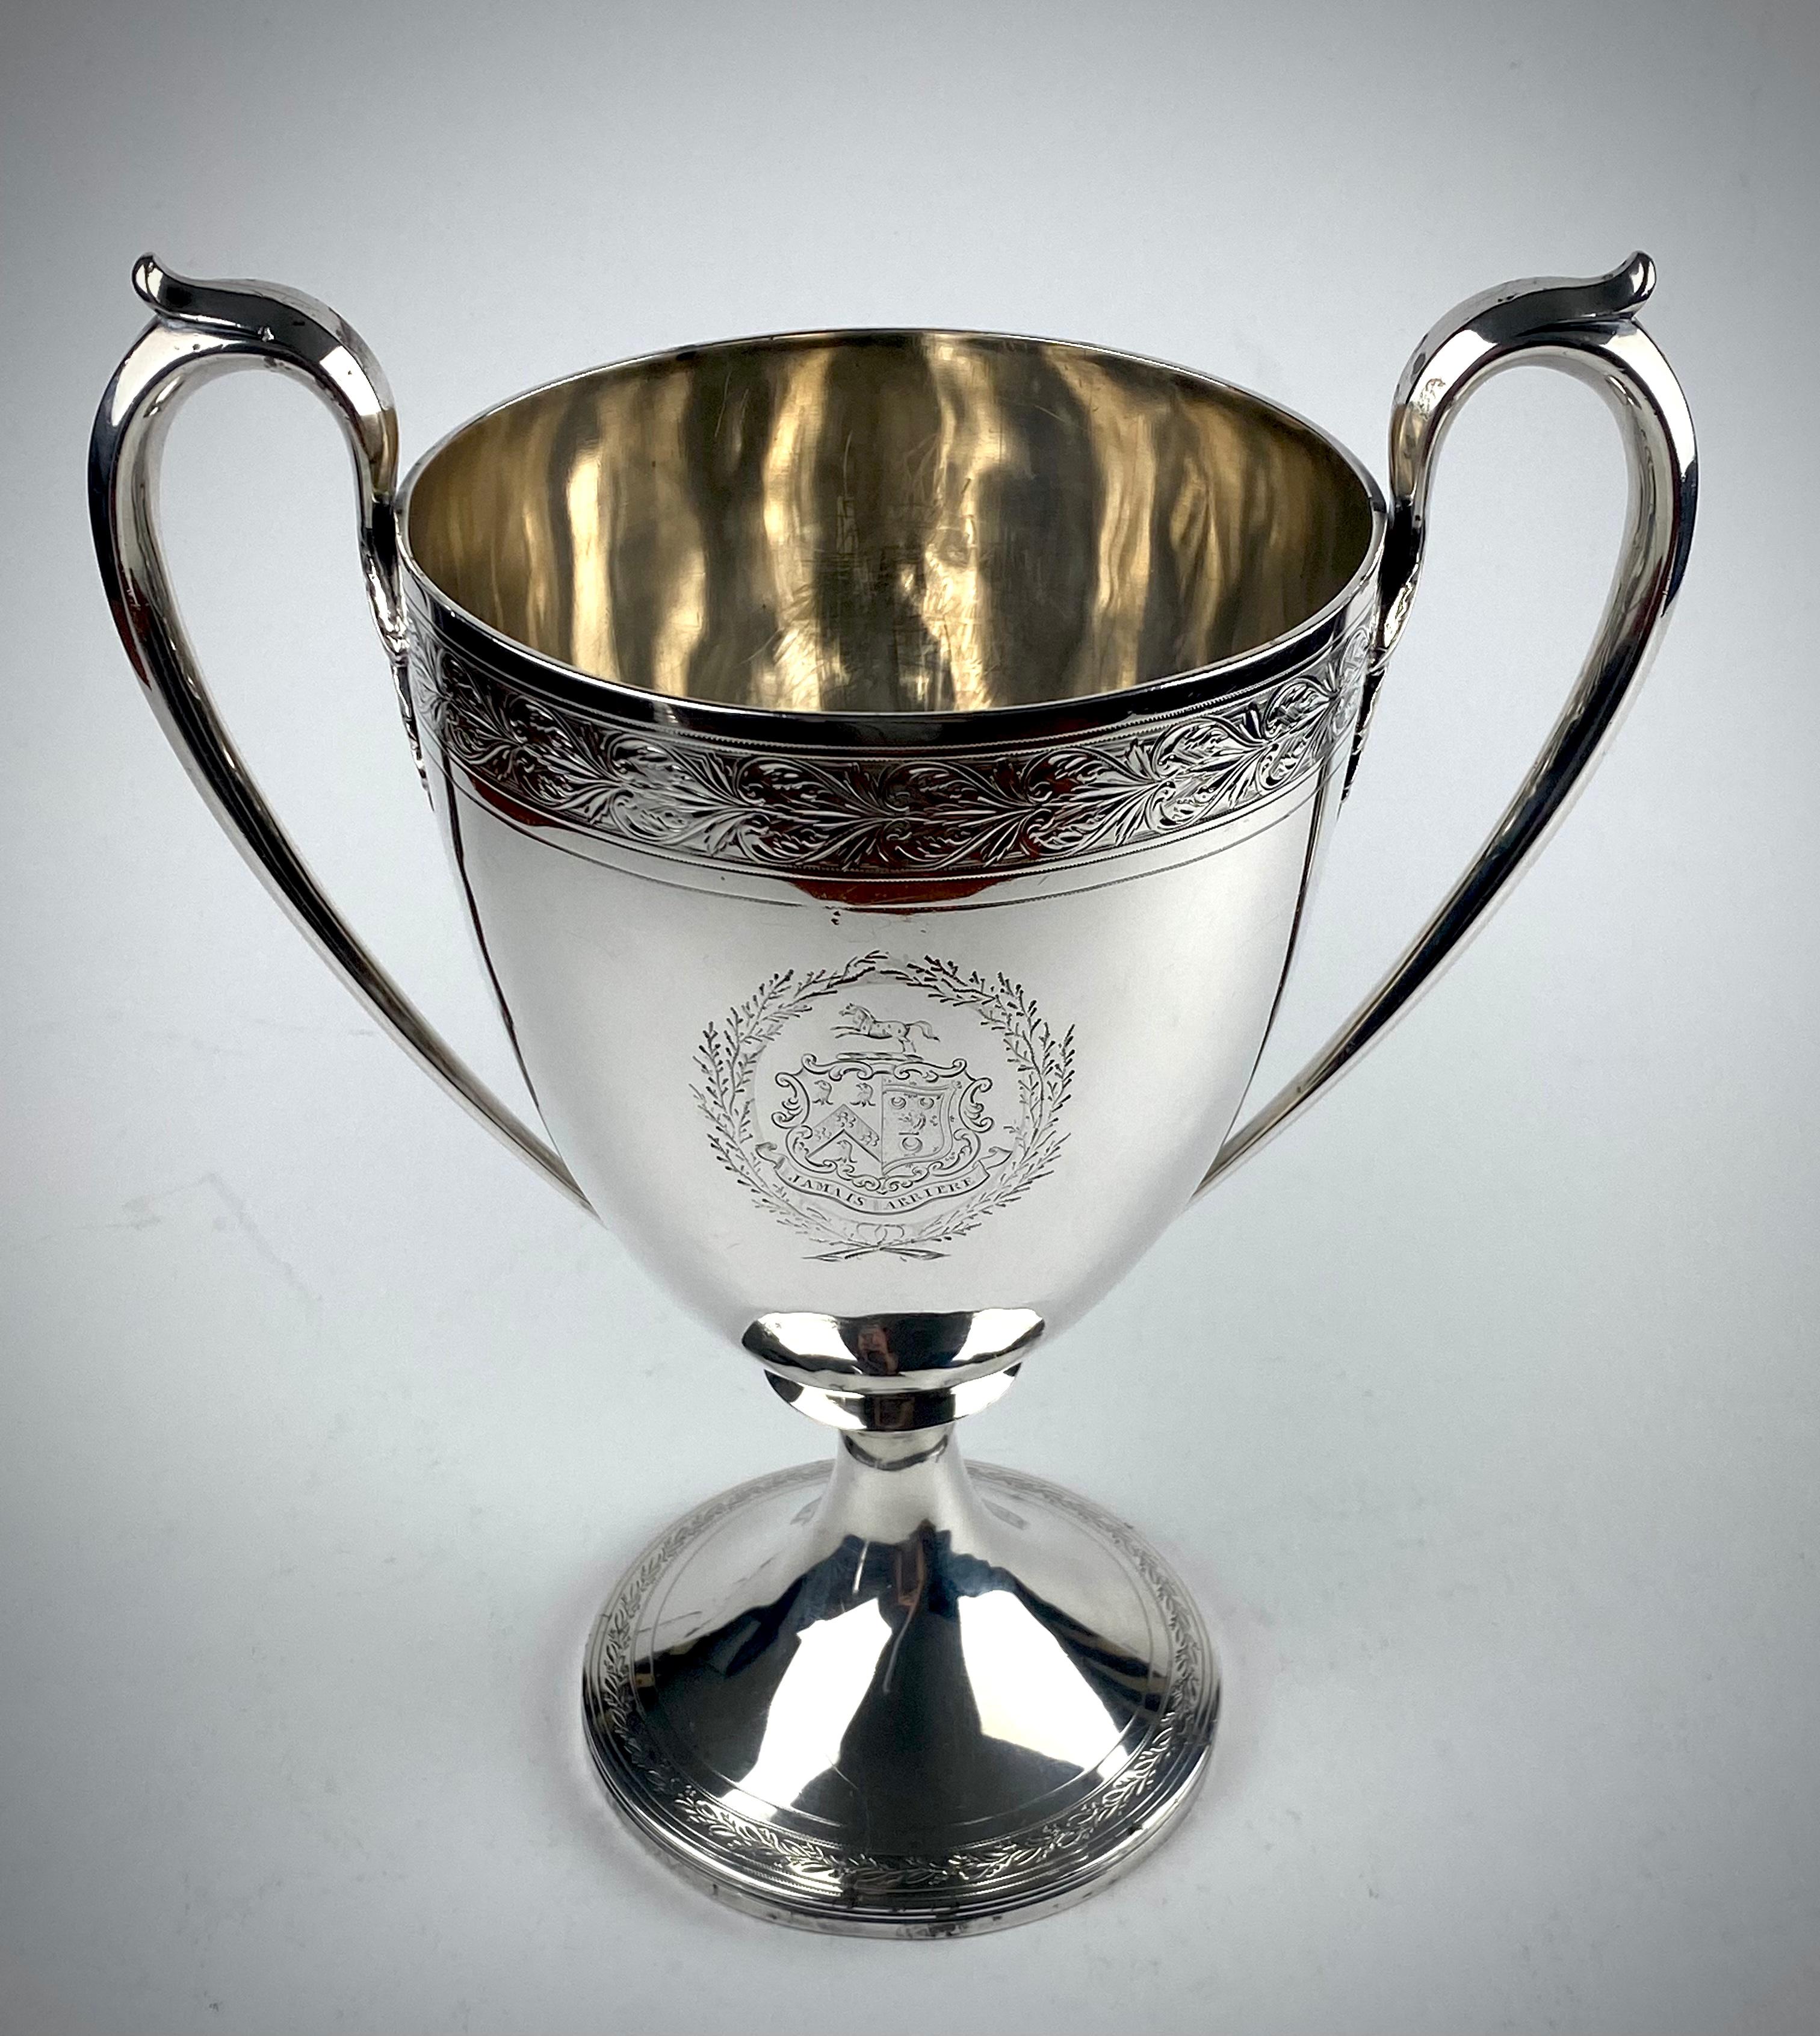 A magnificent  large Georgian solid silver sterling Trophy Cup

Two handled on a circular base 

Bright cut decoration 
Weight 731 grams 
Height 26.5 cm 
Width 23 cm

Hallmarked for Edinburgh 1801
Silversmiths McHattle & Fenwick

The front has an